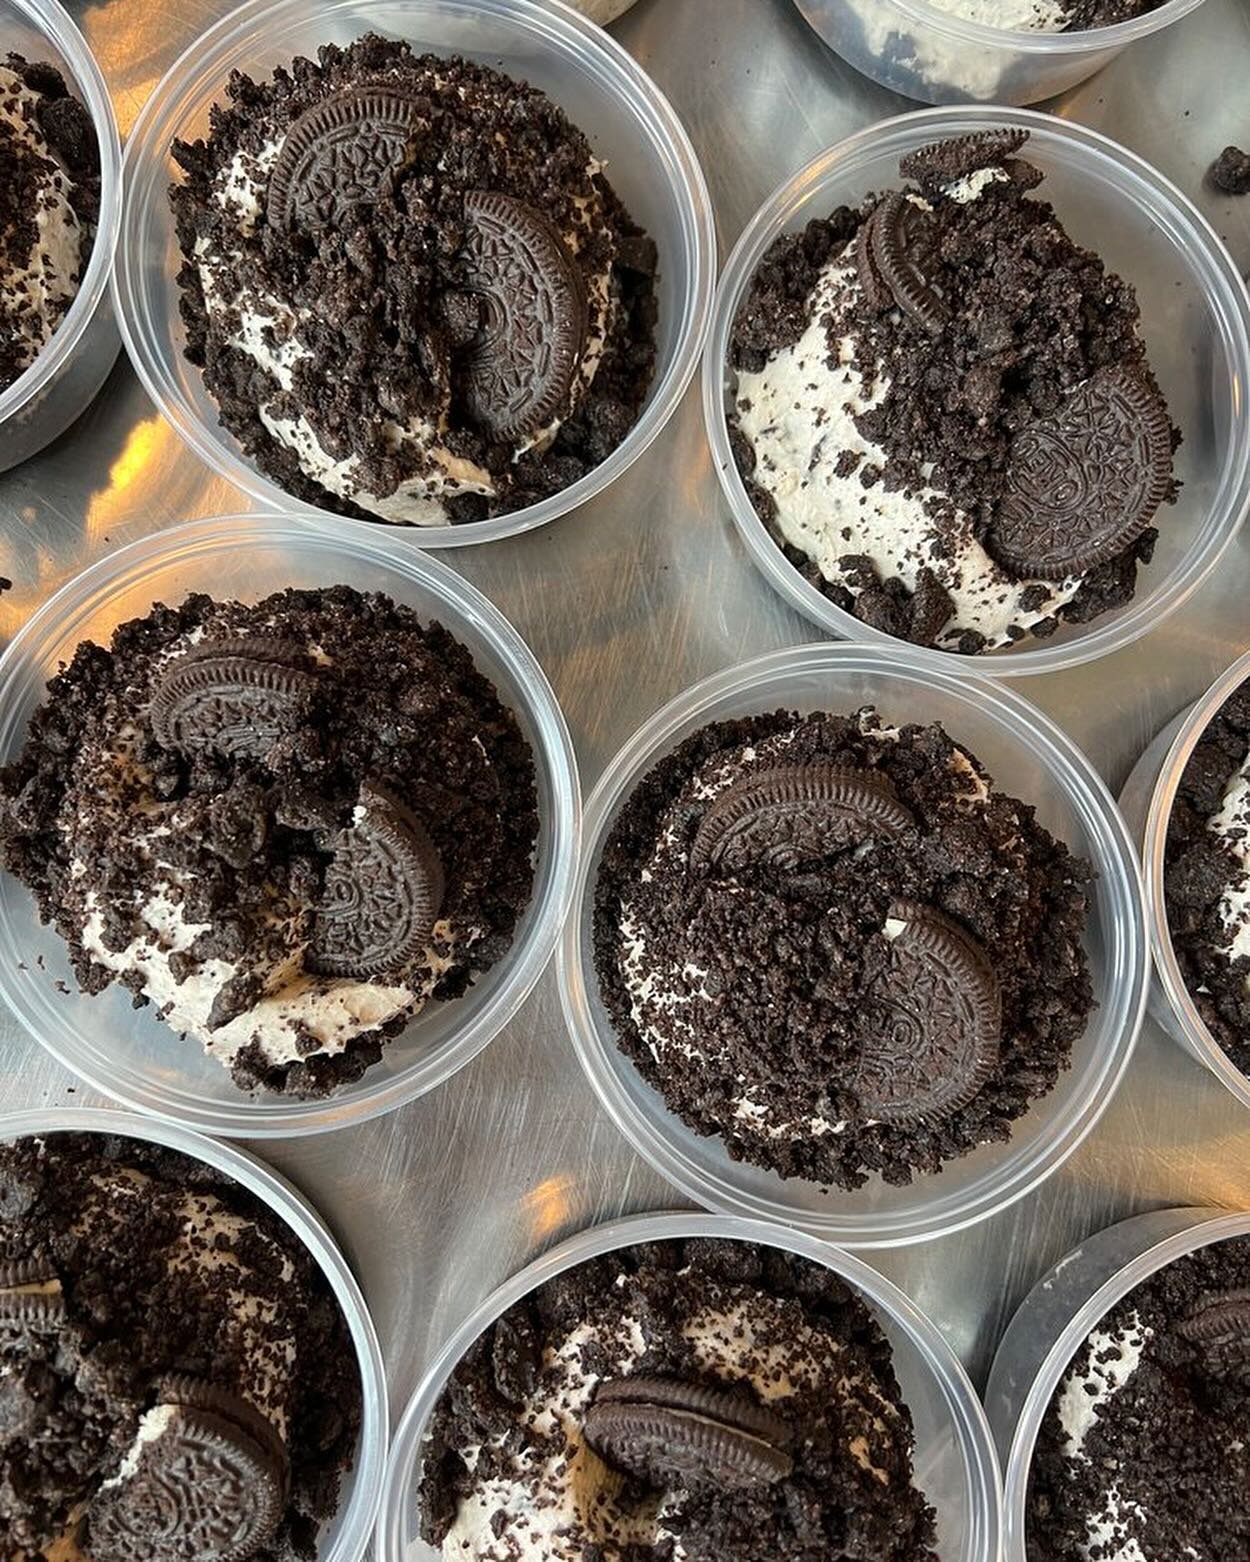 last call for oreo cheesecake 🤤🤤🤤 just a little reminder to pre-order for pickup or delivery by 9pm this evening. we&rsquo;ve got taco stuffed sweet potatoes, shrimp scampi, a summery lasagna, our famous broccoli salad, and more! #plentycville #we